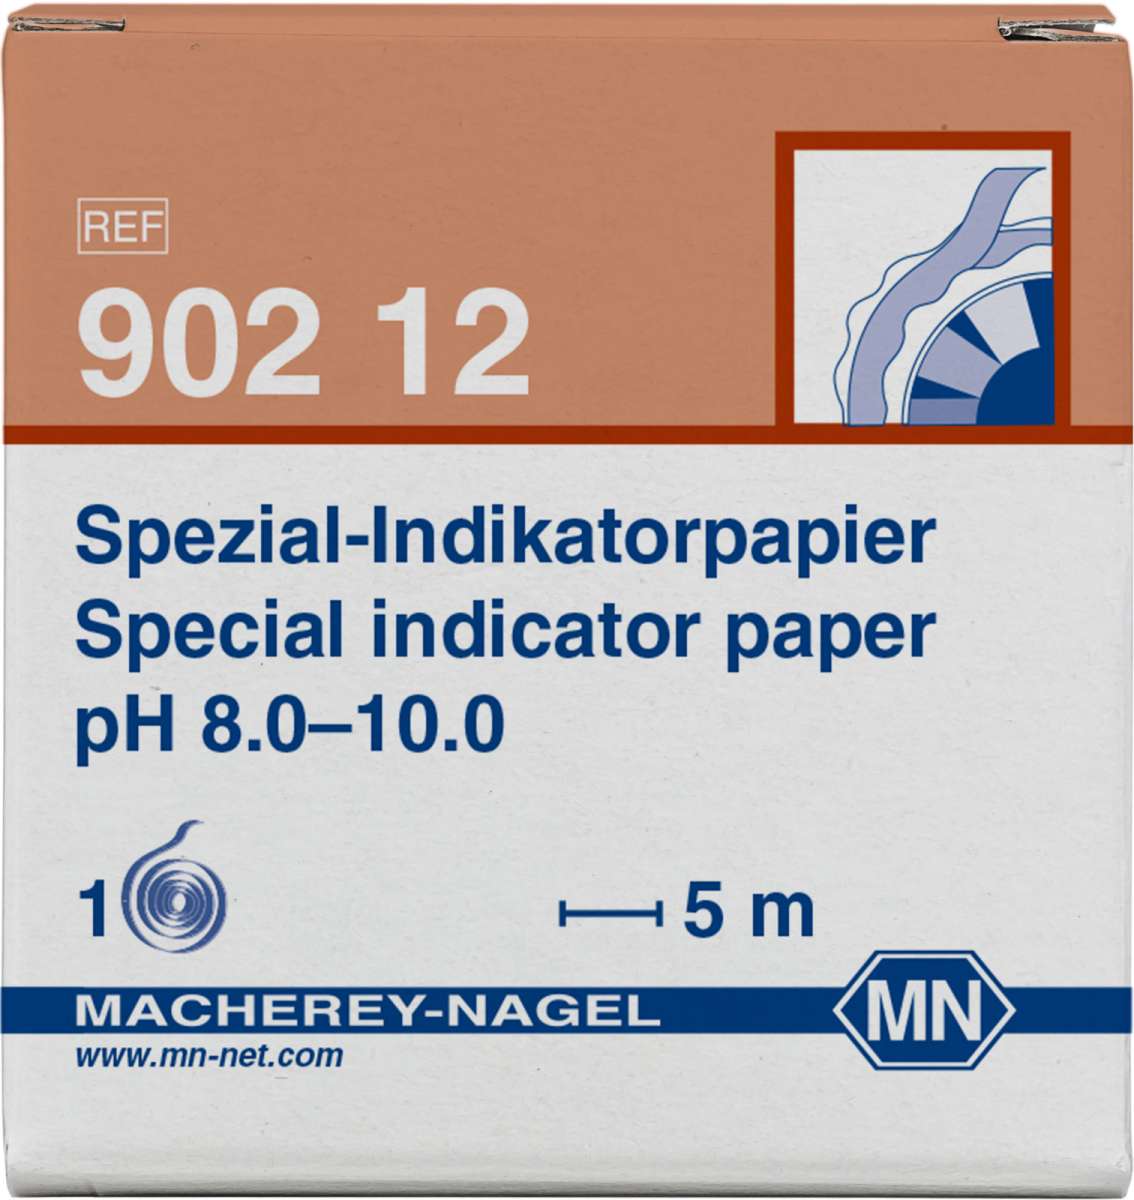 Special indicator paper pH 8.0 to 10.0 (Reel of 5m length and 7mm width)